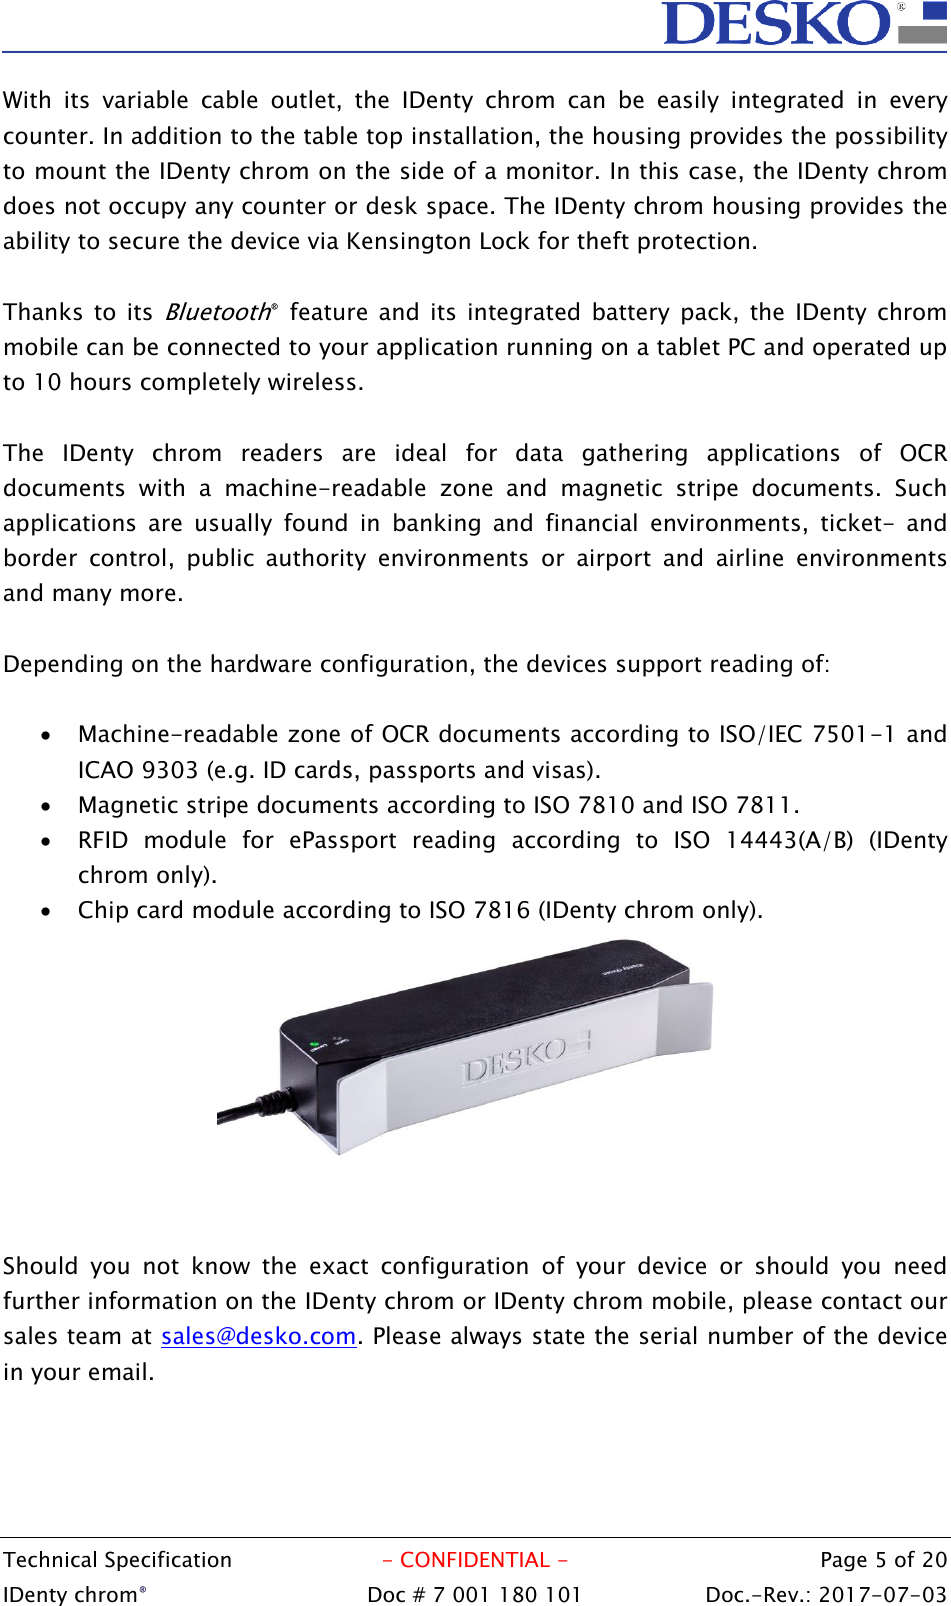  Technical Specification  - CONFIDENTIAL -  Page 5 of 20 IDenty chrom®  Doc # 7 001 180 101   Doc.-Rev.: 2017-07-03   With  its  variable  cable  outlet,  the  IDenty  chrom  can  be  easily  integrated  in  every counter. In addition to the table top installation, the housing provides the possibility to mount the IDenty chrom on the side of a monitor. In this case, the IDenty chrom does not occupy any counter or desk space. The IDenty chrom housing provides the ability to secure the device via Kensington Lock for theft protection.  Thanks to its Bluetooth®  feature and its integrated  battery  pack,  the IDenty chrom mobile can be connected to your application running on a tablet PC and operated up to 10 hours completely wireless.   The  IDenty  chrom  readers  are  ideal  for  data  gathering  applications  of  OCR documents  with  a  machine-readable  zone  and  magnetic  stripe  documents.  Such applications  are  usually  found  in  banking  and  financial  environments,  ticket-  and border  control,  public  authority  environments  or  airport  and  airline  environments and many more.  Depending on the hardware configuration, the devices support reading of:   Machine-readable zone of OCR documents according to ISO/IEC 7501-1 and ICAO 9303 (e.g. ID cards, passports and visas).  Magnetic stripe documents according to ISO 7810 and ISO 7811.  RFID  module  for  ePassport  reading  according  to  ISO  14443(A/B)  (IDenty chrom only).  Chip card module according to ISO 7816 (IDenty chrom only).    Should  you  not  know  the  exact  configuration  of  your  device  or  should  you  need further information on the IDenty chrom or IDenty chrom mobile, please contact our sales team at sales@desko.com. Please always state the serial number of the device in your email.   